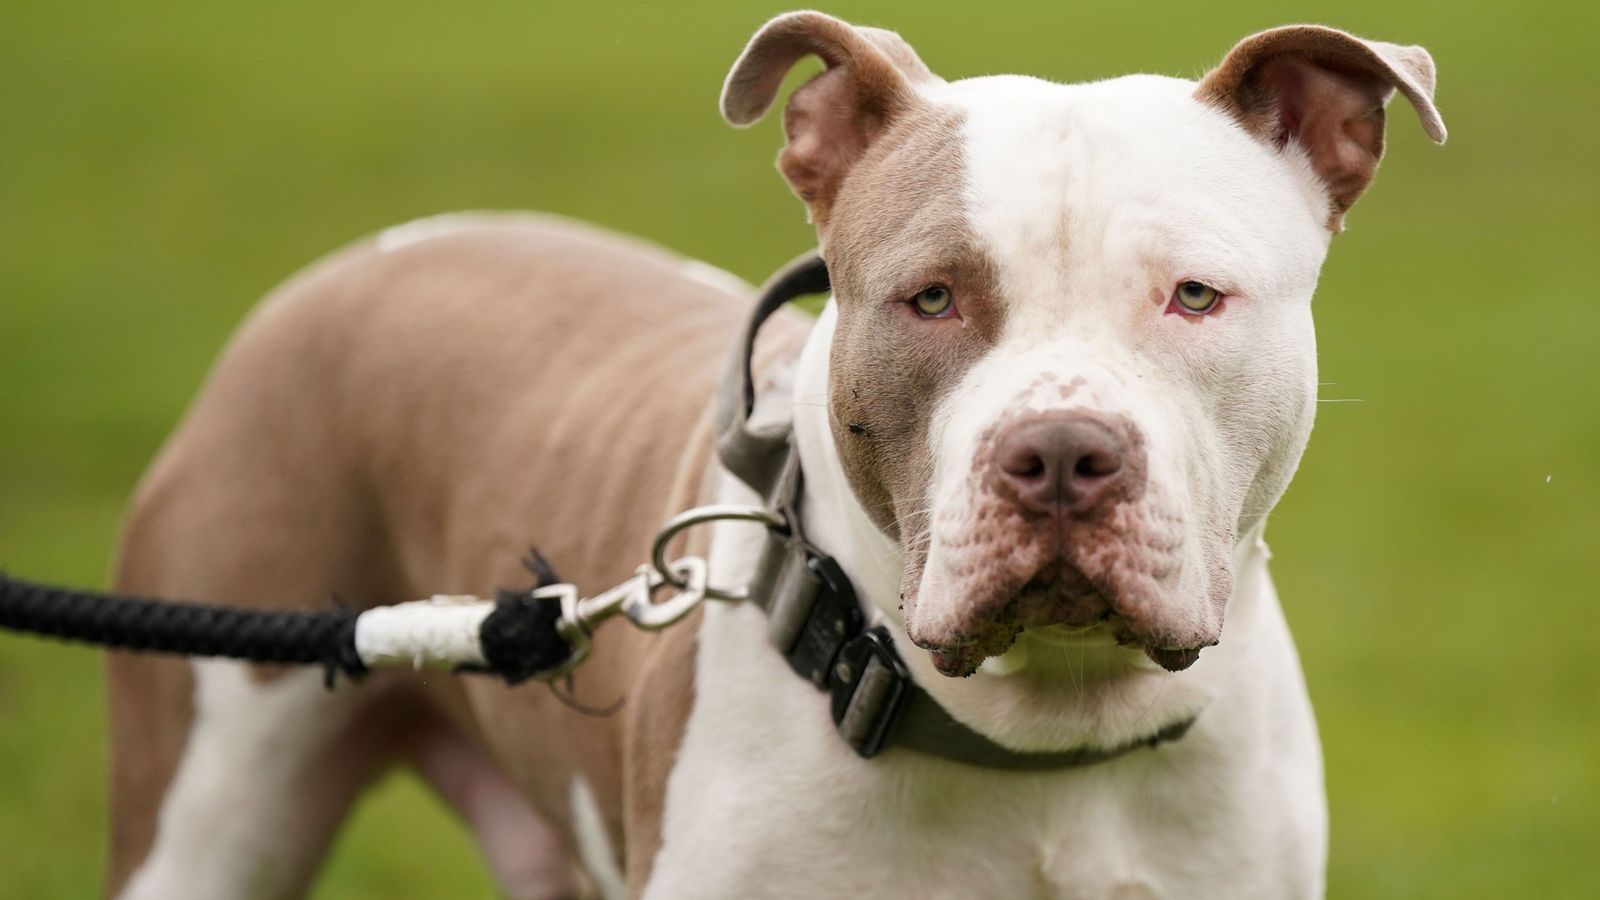 XL bully ban comes into force as police chief urges owners to comply with authorities